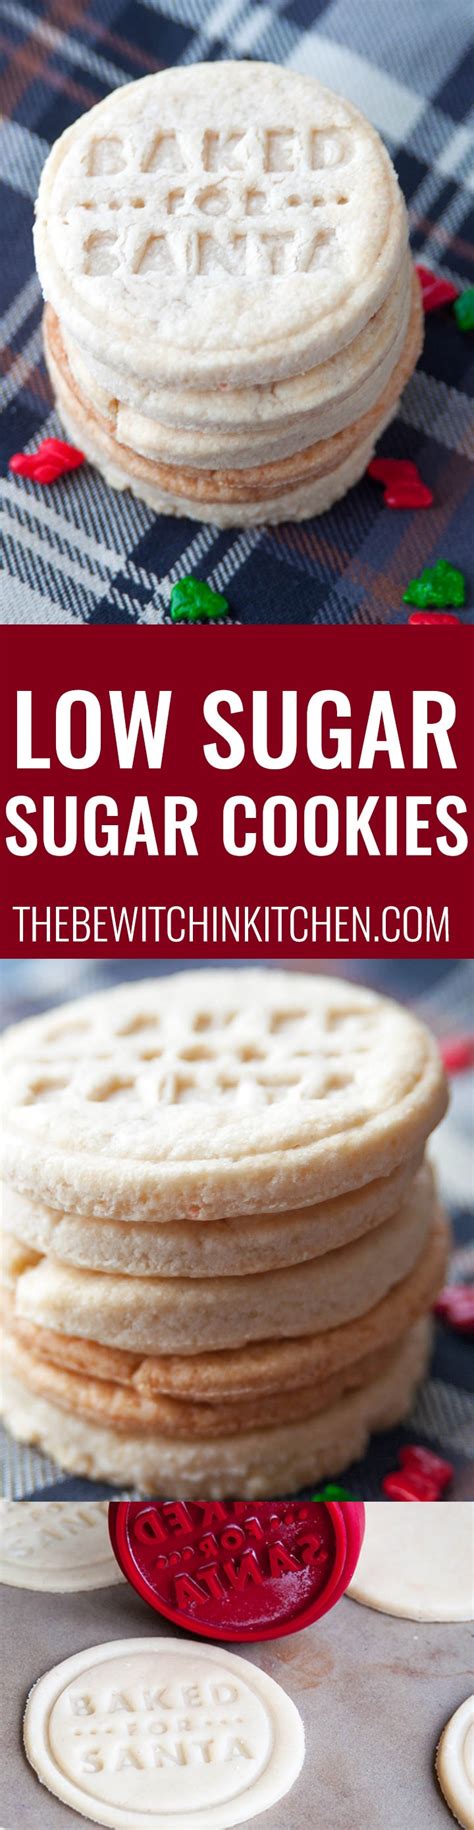 I love the challenge of developing a recipe that has all of the classic texture and flavor, but with less sugar and in that way, this healthy sugar cookie is a great option. Low Sugar Cookies Recipe | The Bewitchin' Kitchen